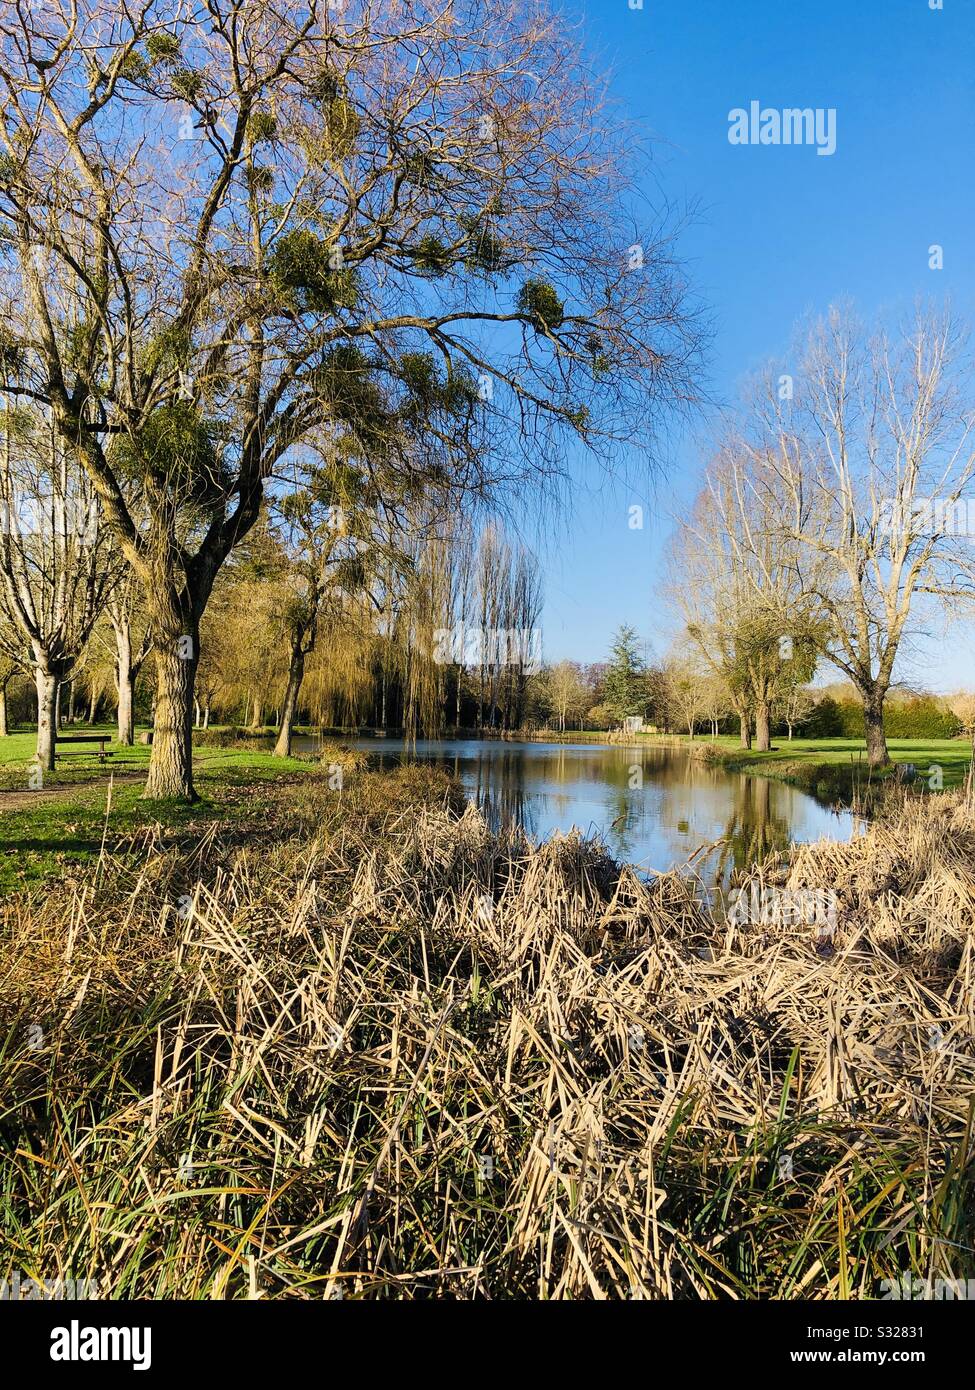 Pond and trees in park. Stock Photo